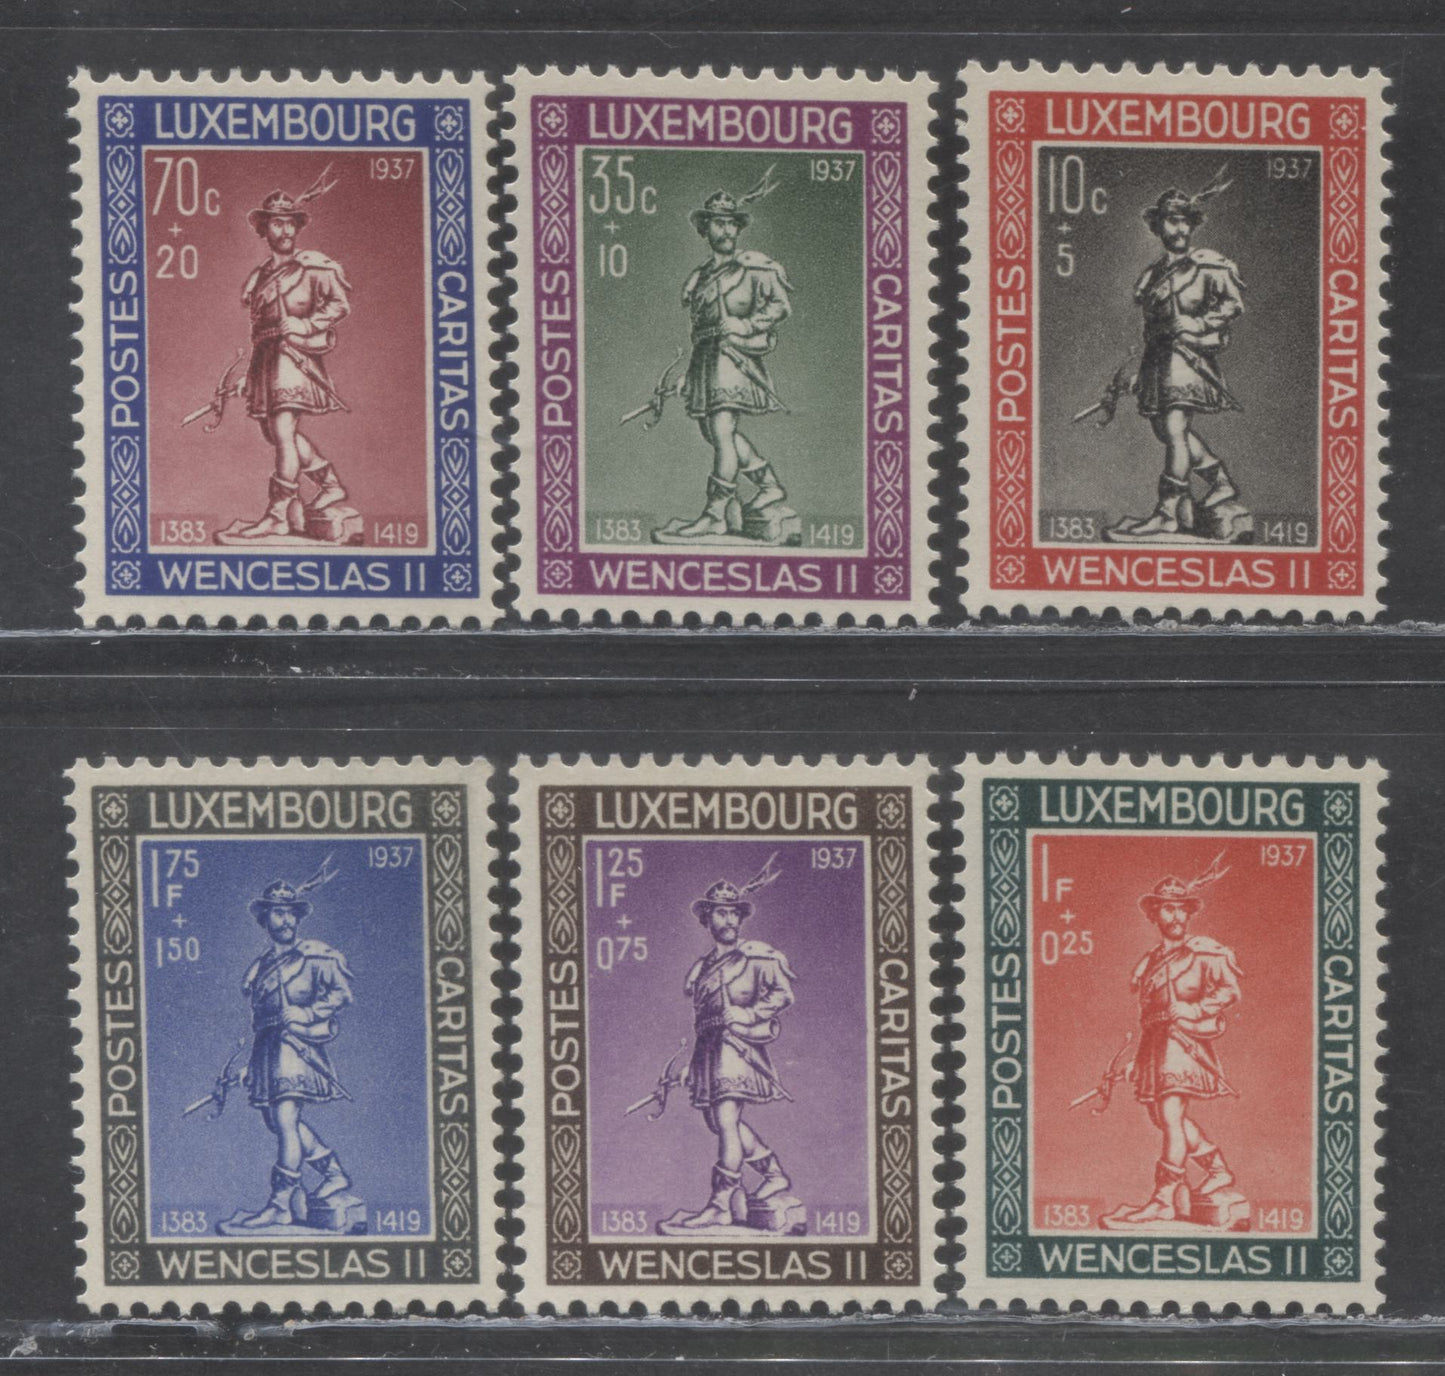 Lot 463 Luxembourg SC#B79-B84 1937 Wenceslas II Semi Postals, 6 VFNH Singles, Click on Listing to See ALL Pictures, 2022 Scott Classic Cat. $20 USD